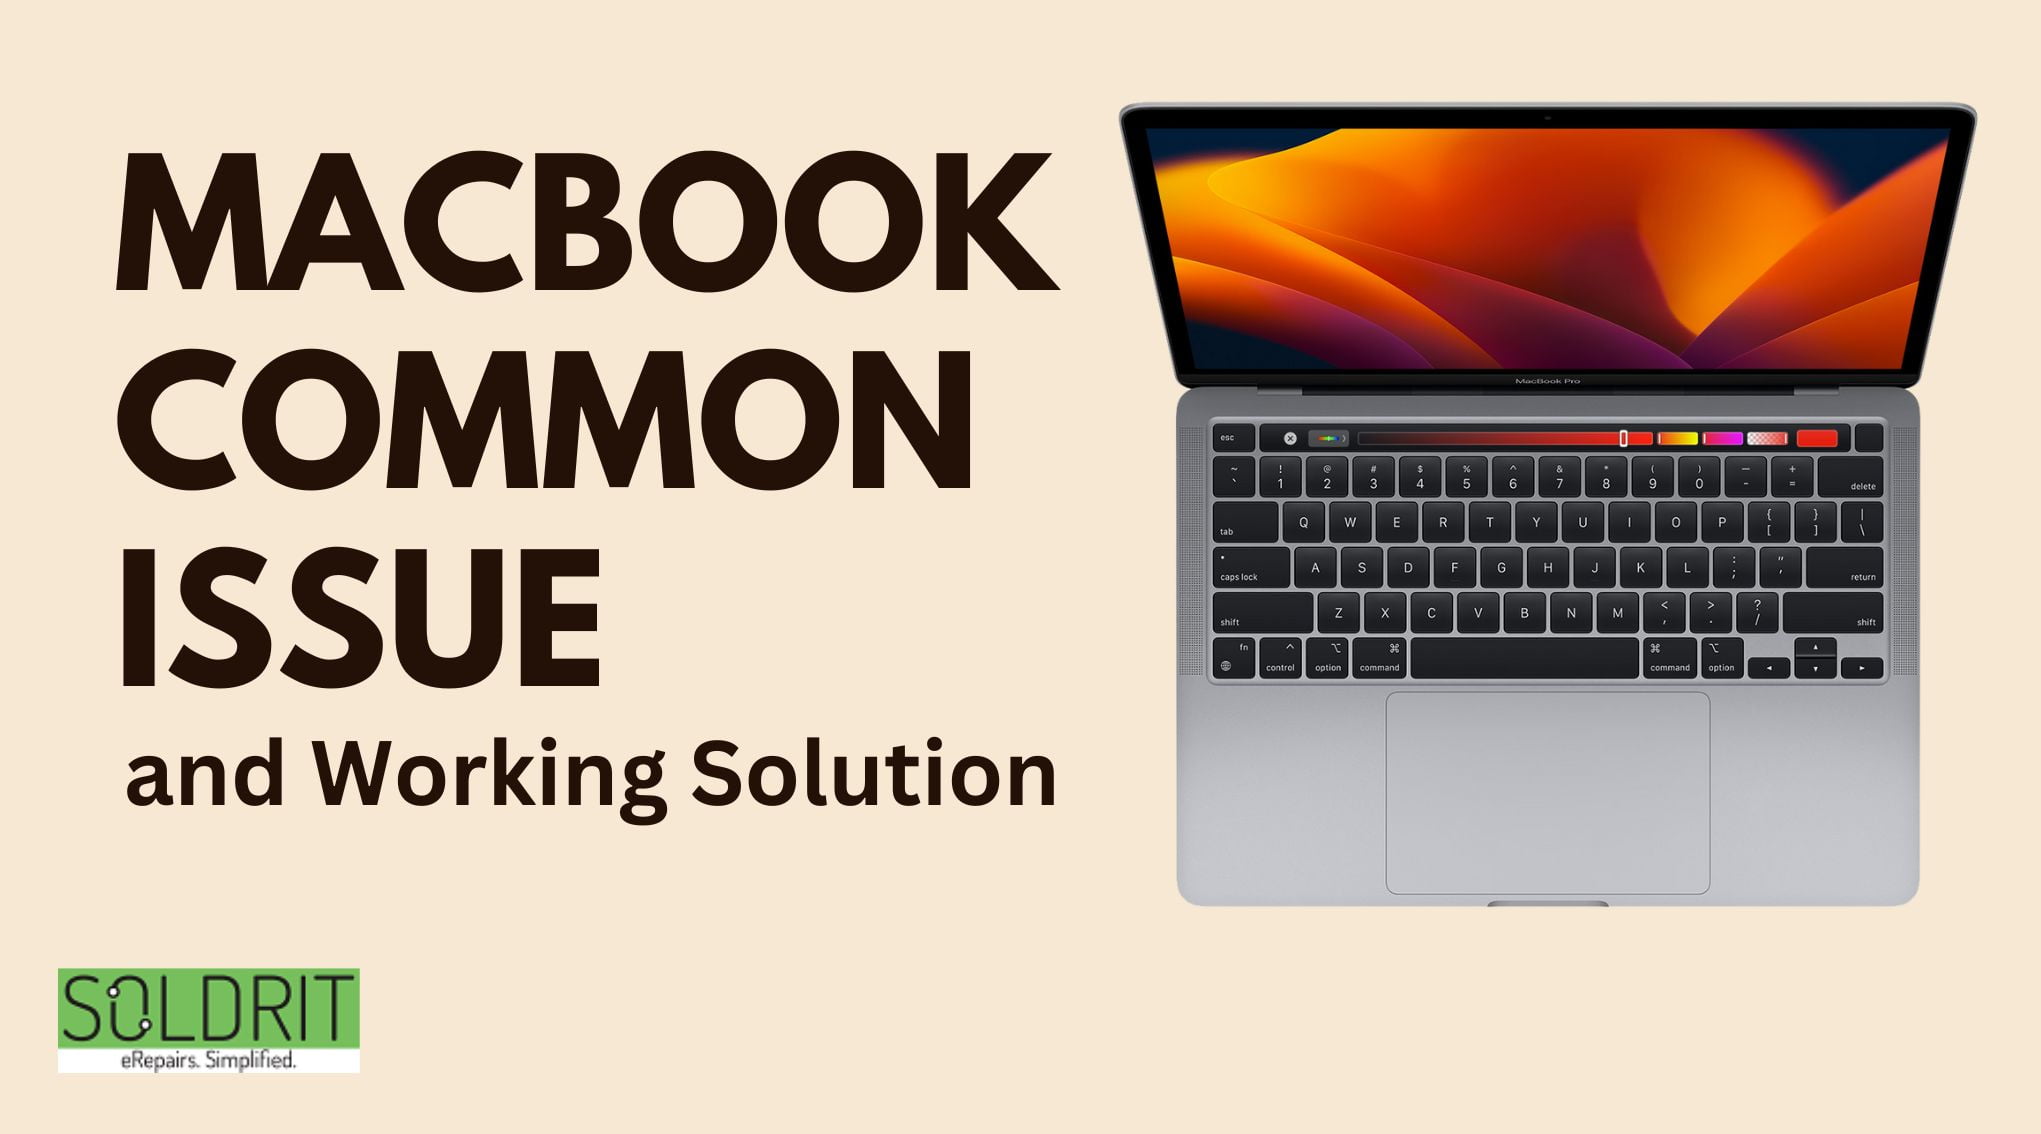 MacBook Common Issue And Working Solution